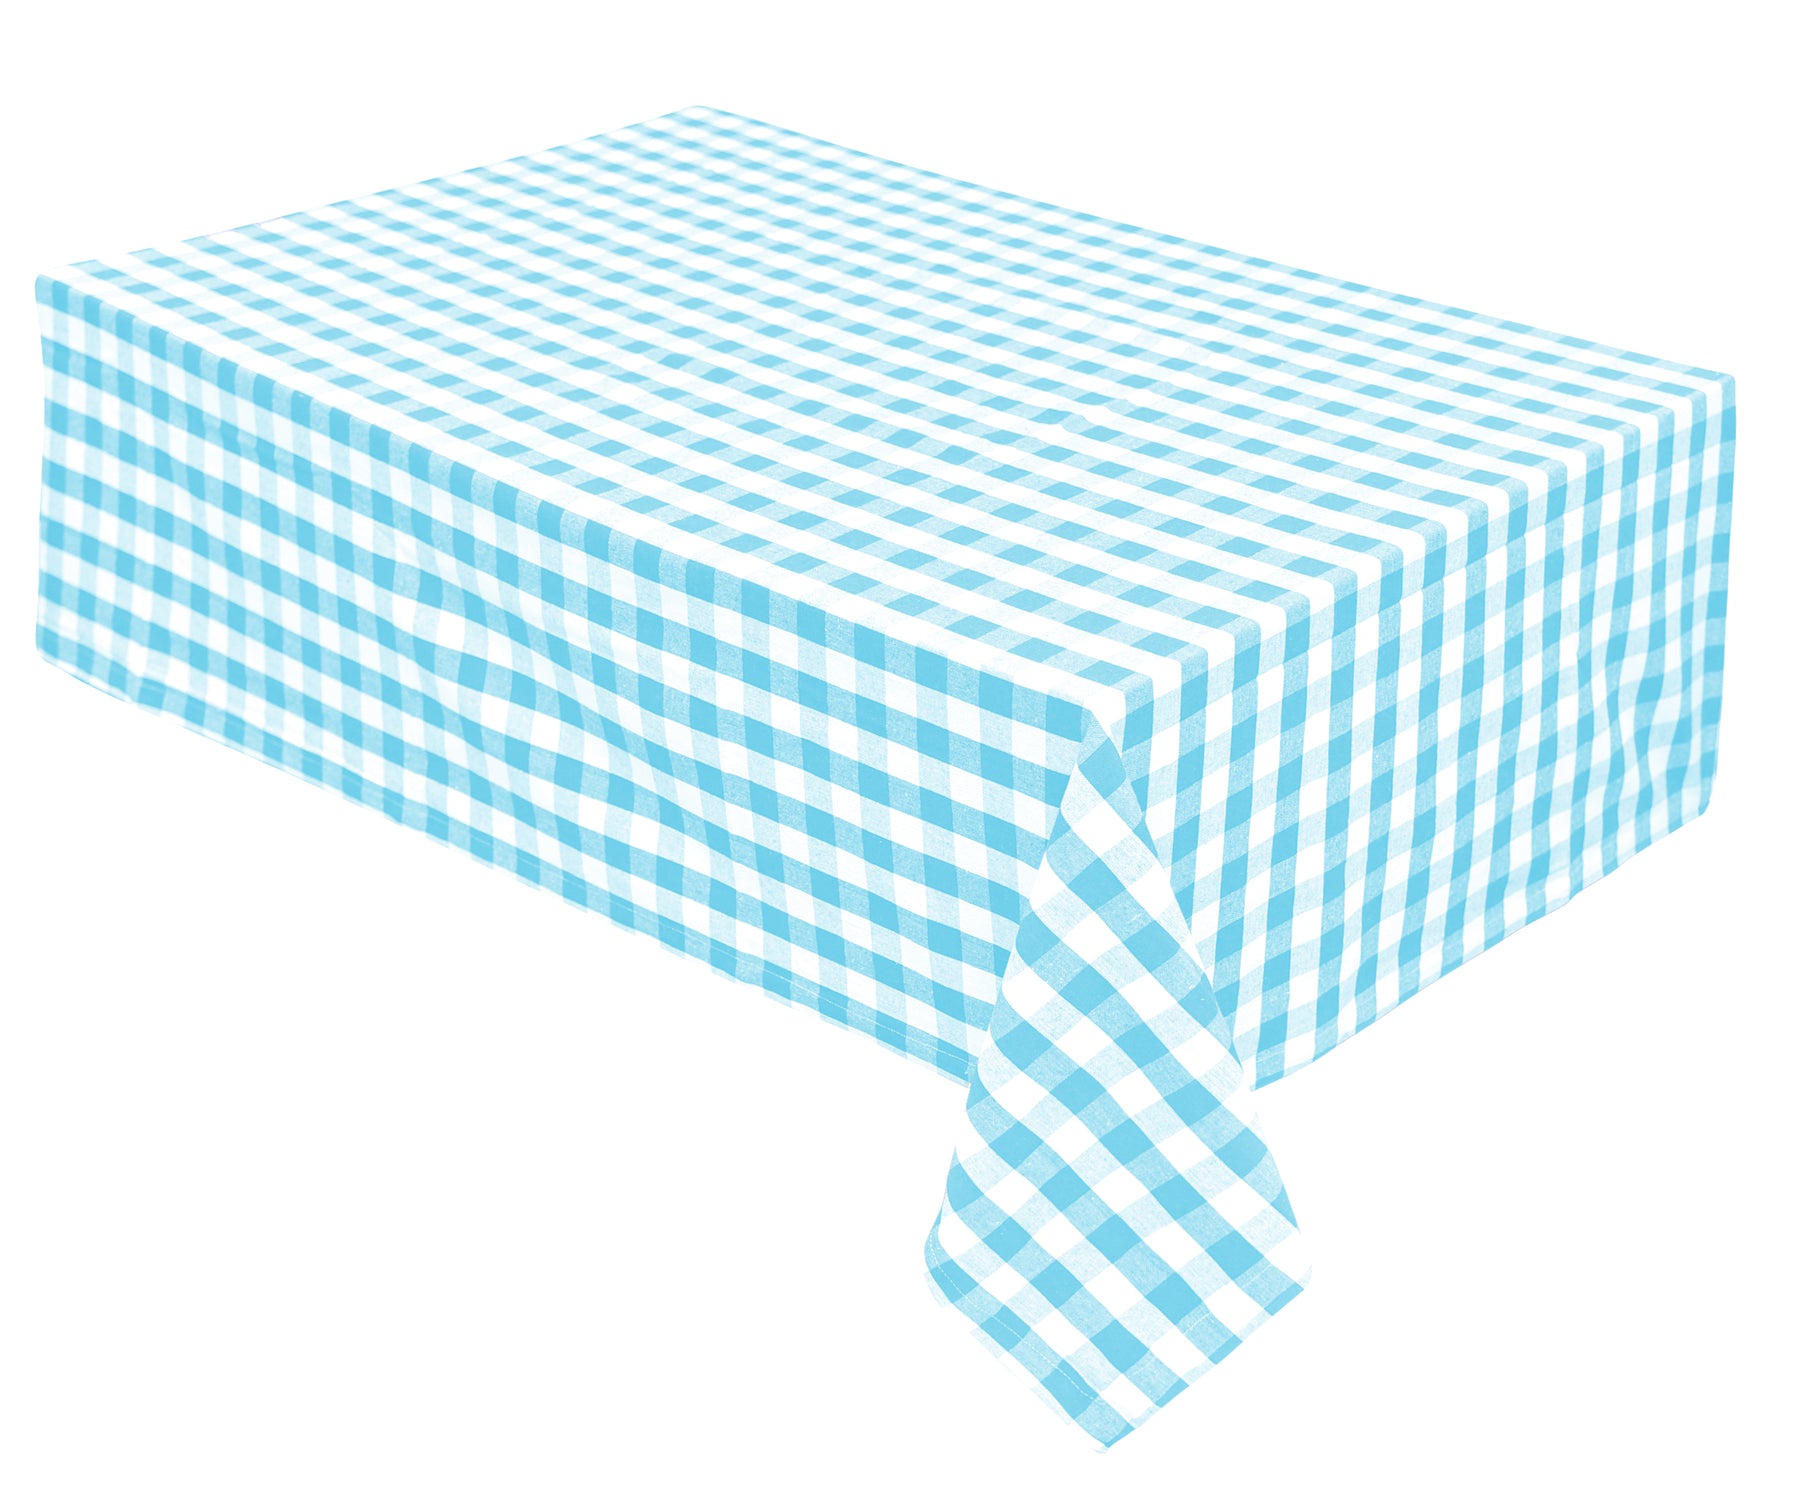 Tablecloth Checked pattern, timeless and elegant.